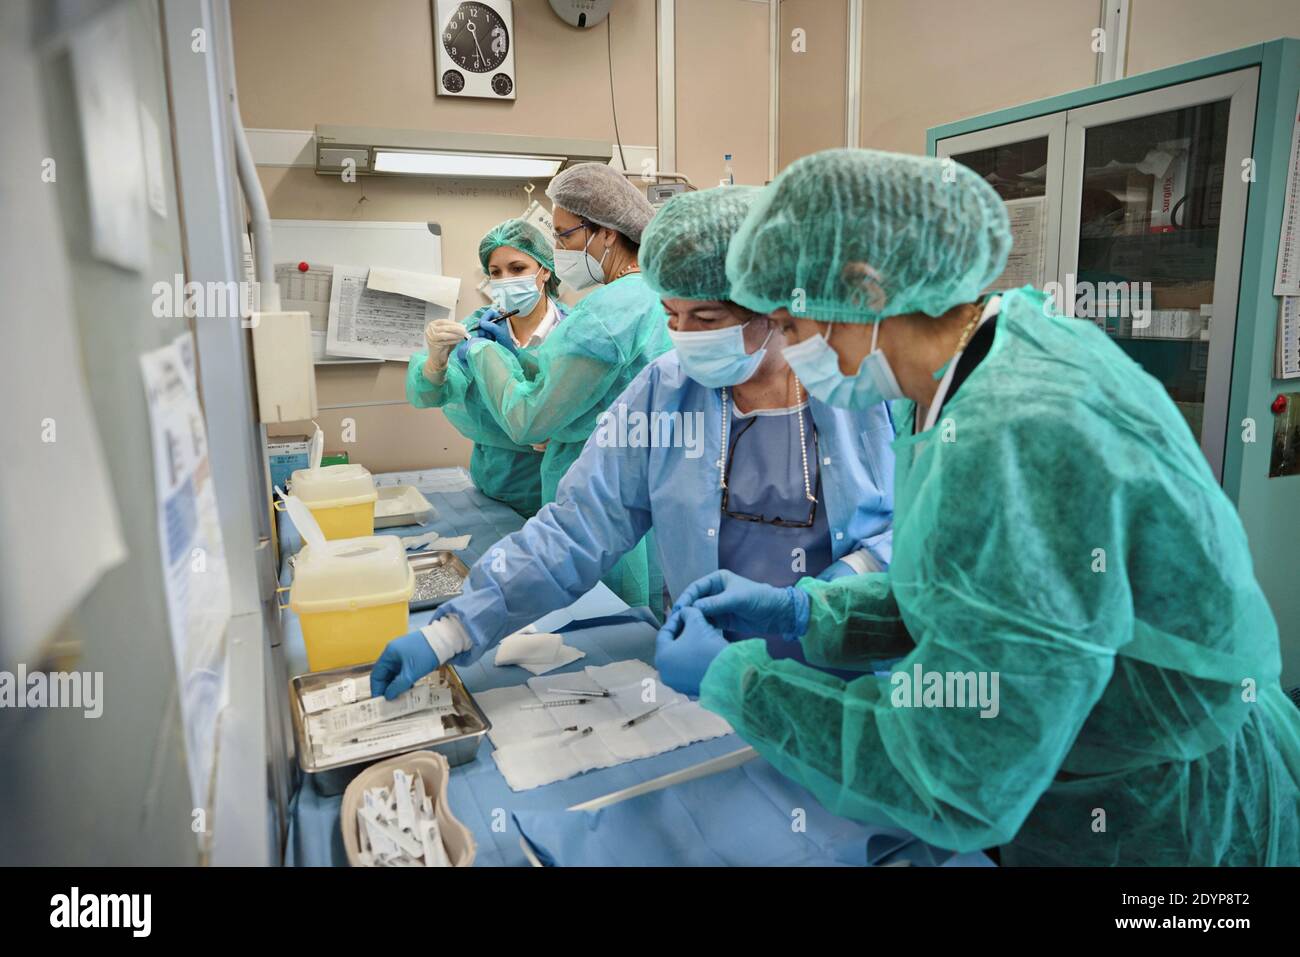 Health workers at work during the first day of the vaccination campaign against COVID 19 at the Amedeo di Savoia Hospital. Turin, Italy - December 27, Stock Photo